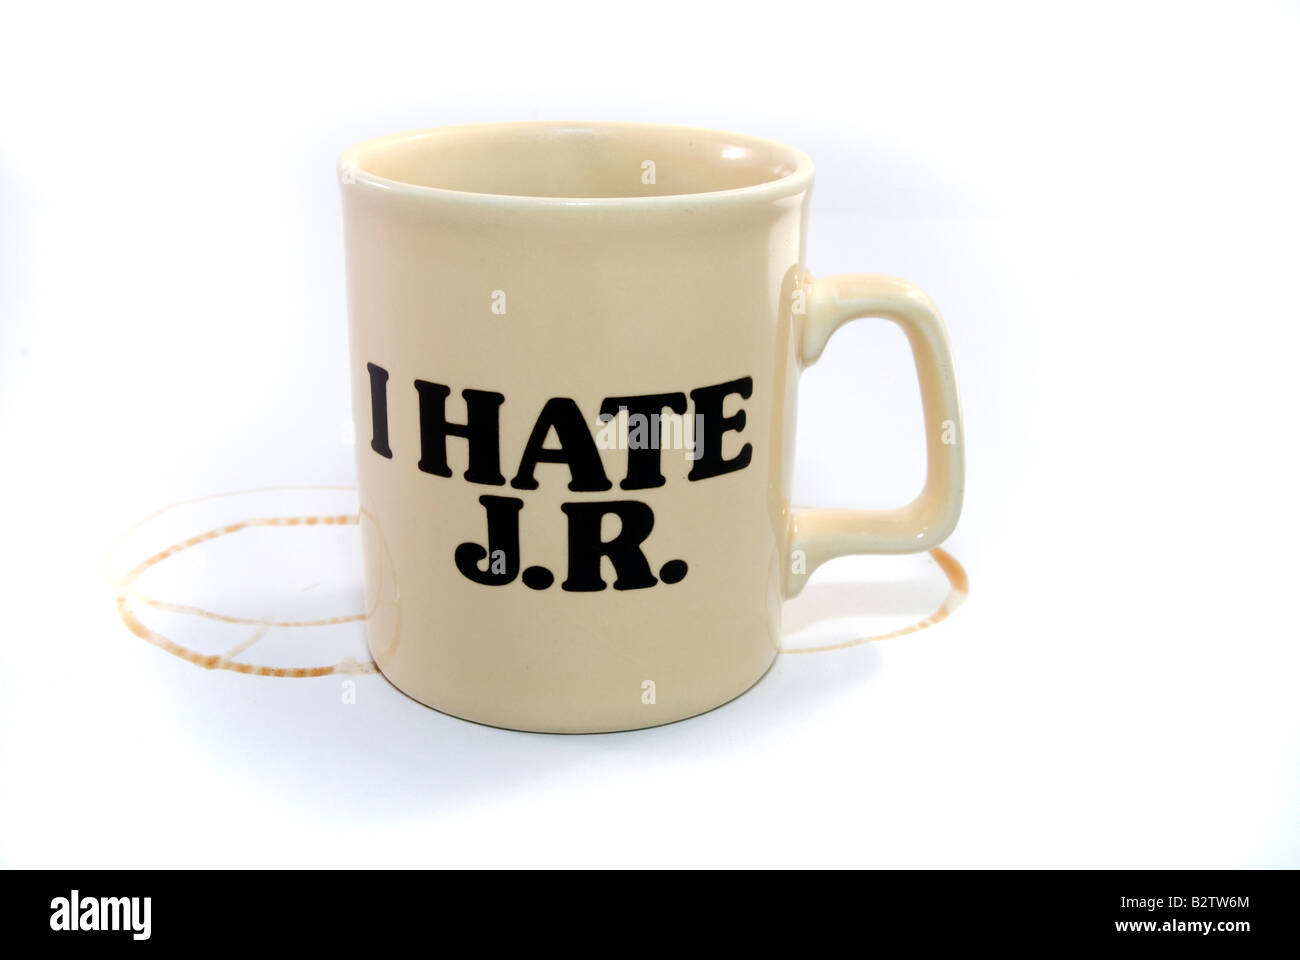 A cup of coffee with ring marks and the "I HATE JR" slogan. JR - the fictional evil boss character from the 80s TV series DALLAS Stock Photo